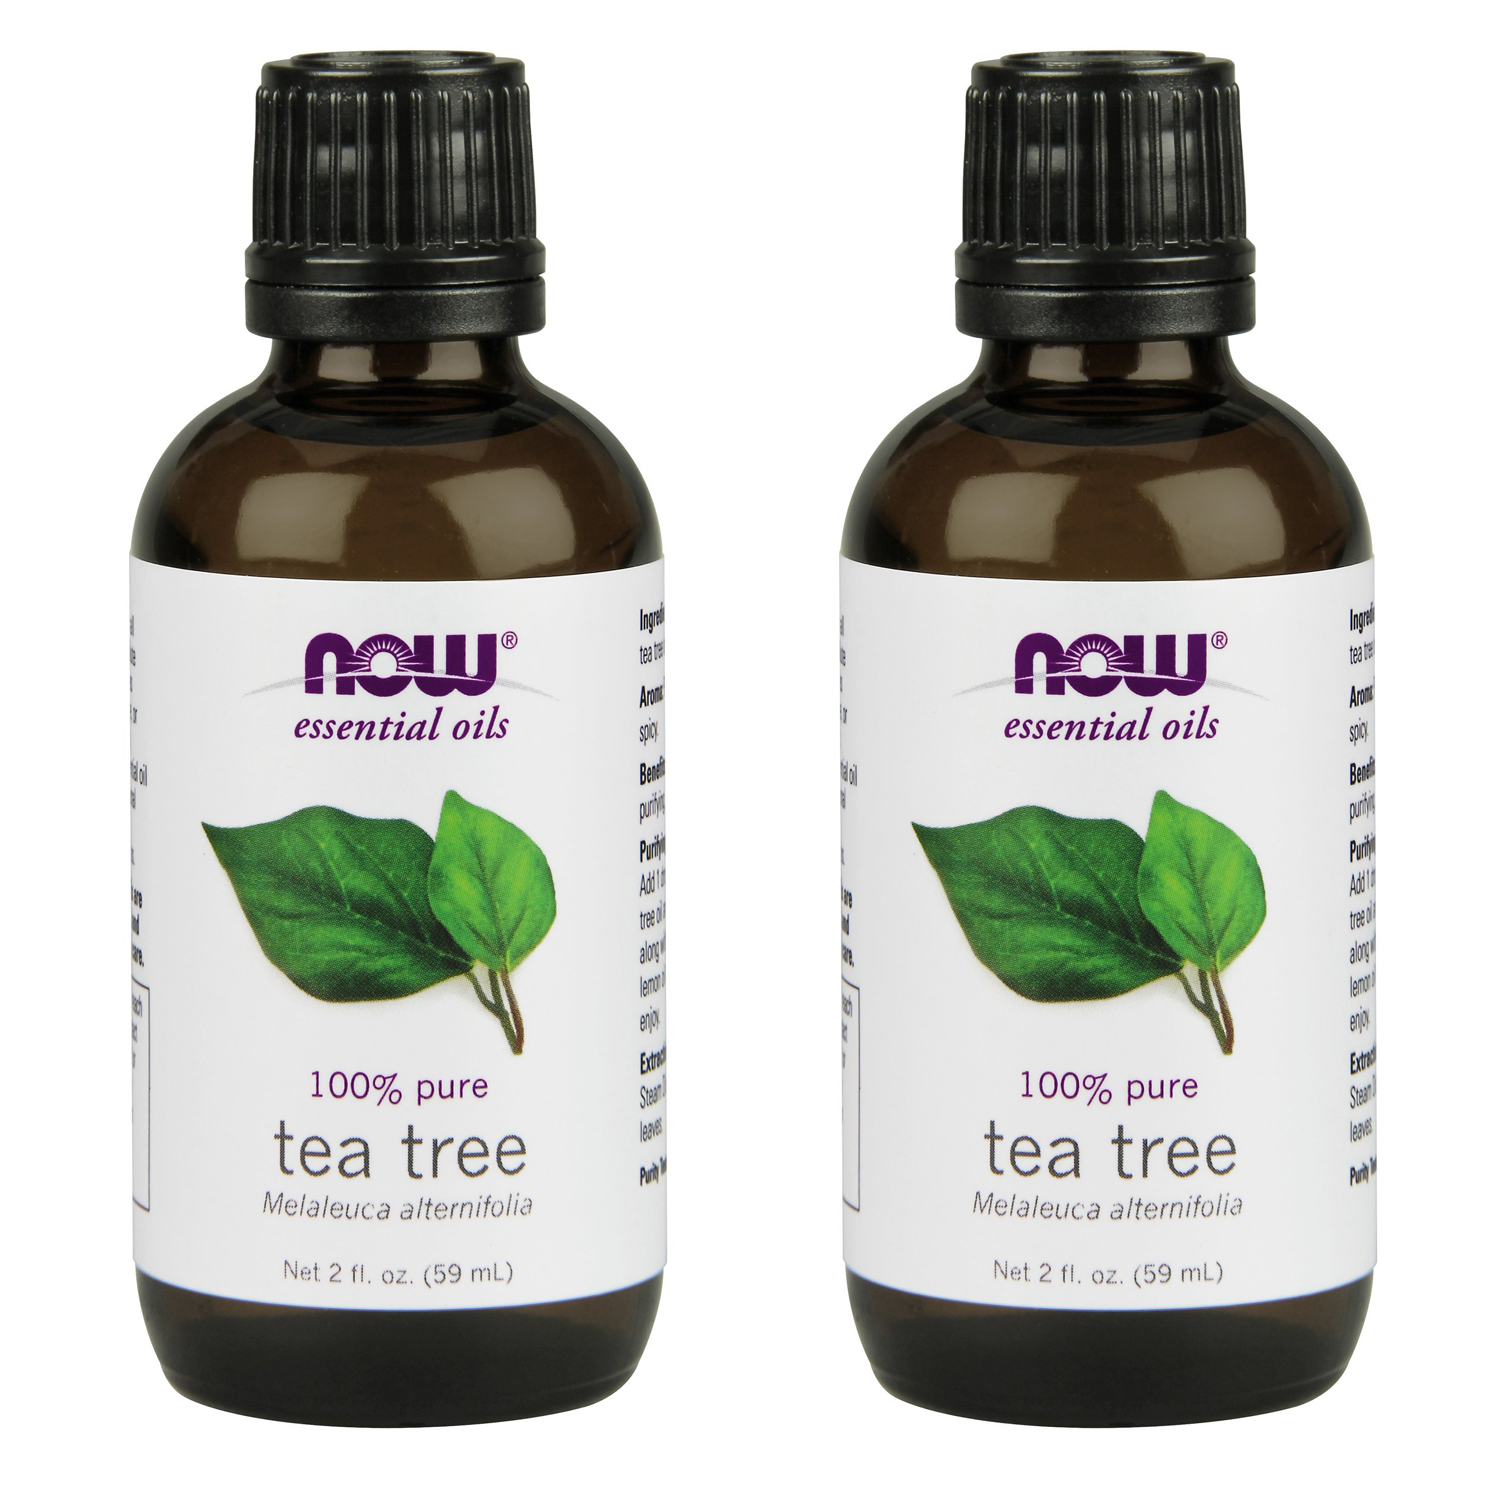 NOW Essential Oils, Tea Tree Oil, Cleansing Aromatherapy Scent, Steam Distilled, 100% Pure, Vegan, Child Resistant Cap, 2-Ounce - 2 Packs - image 1 of 6